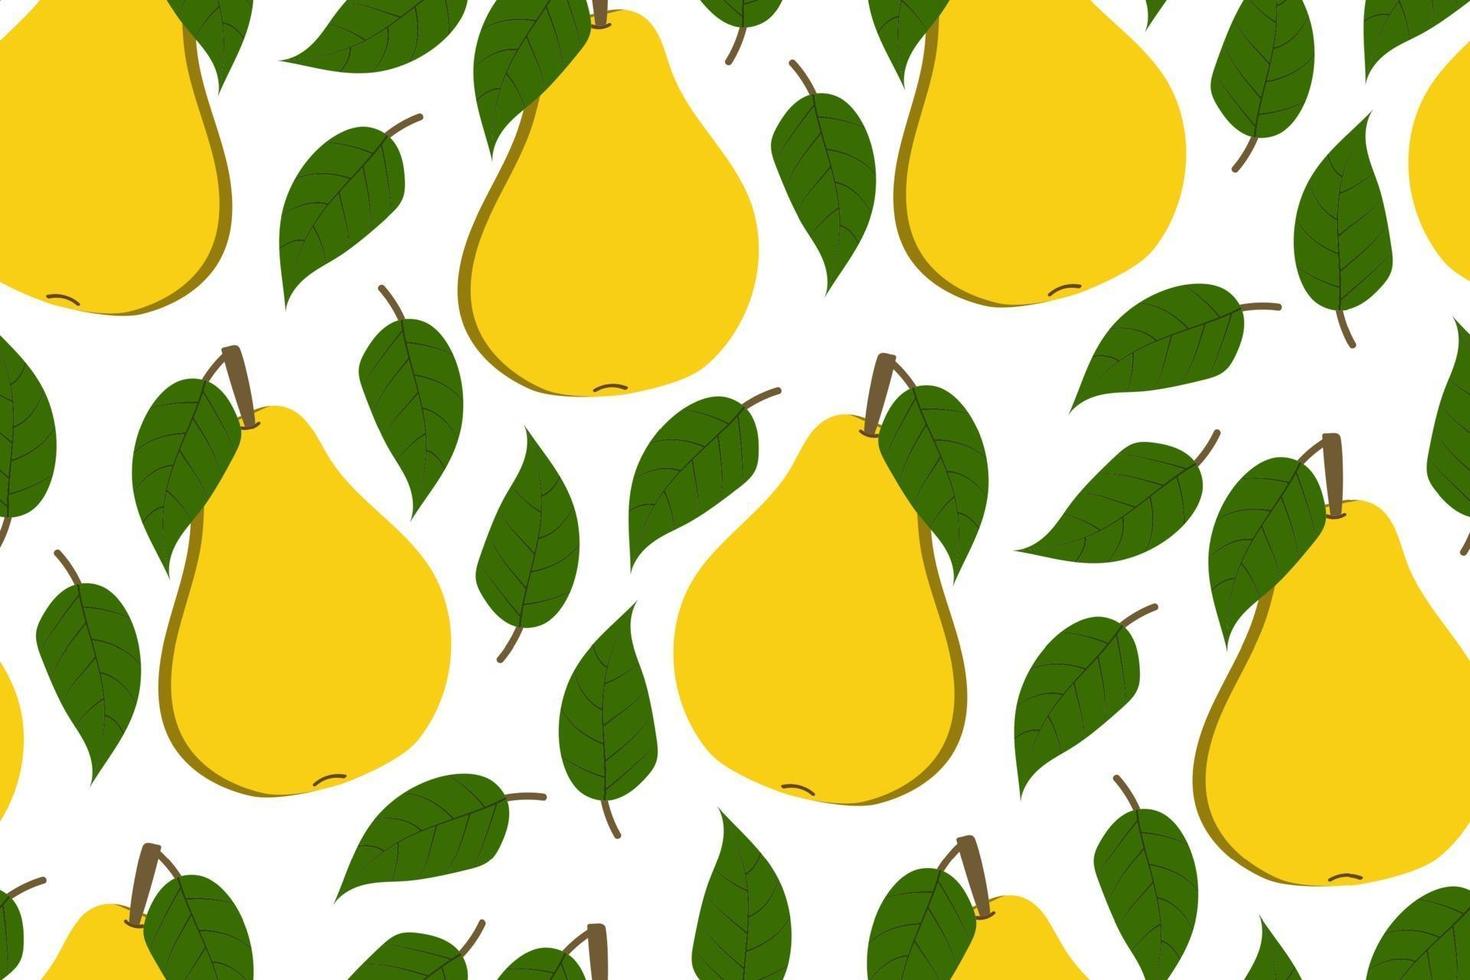 Tropical background with pears. Fruit repeated background. Vector illustration of a seamless pattern with fruits. Modern exotic abstract design.